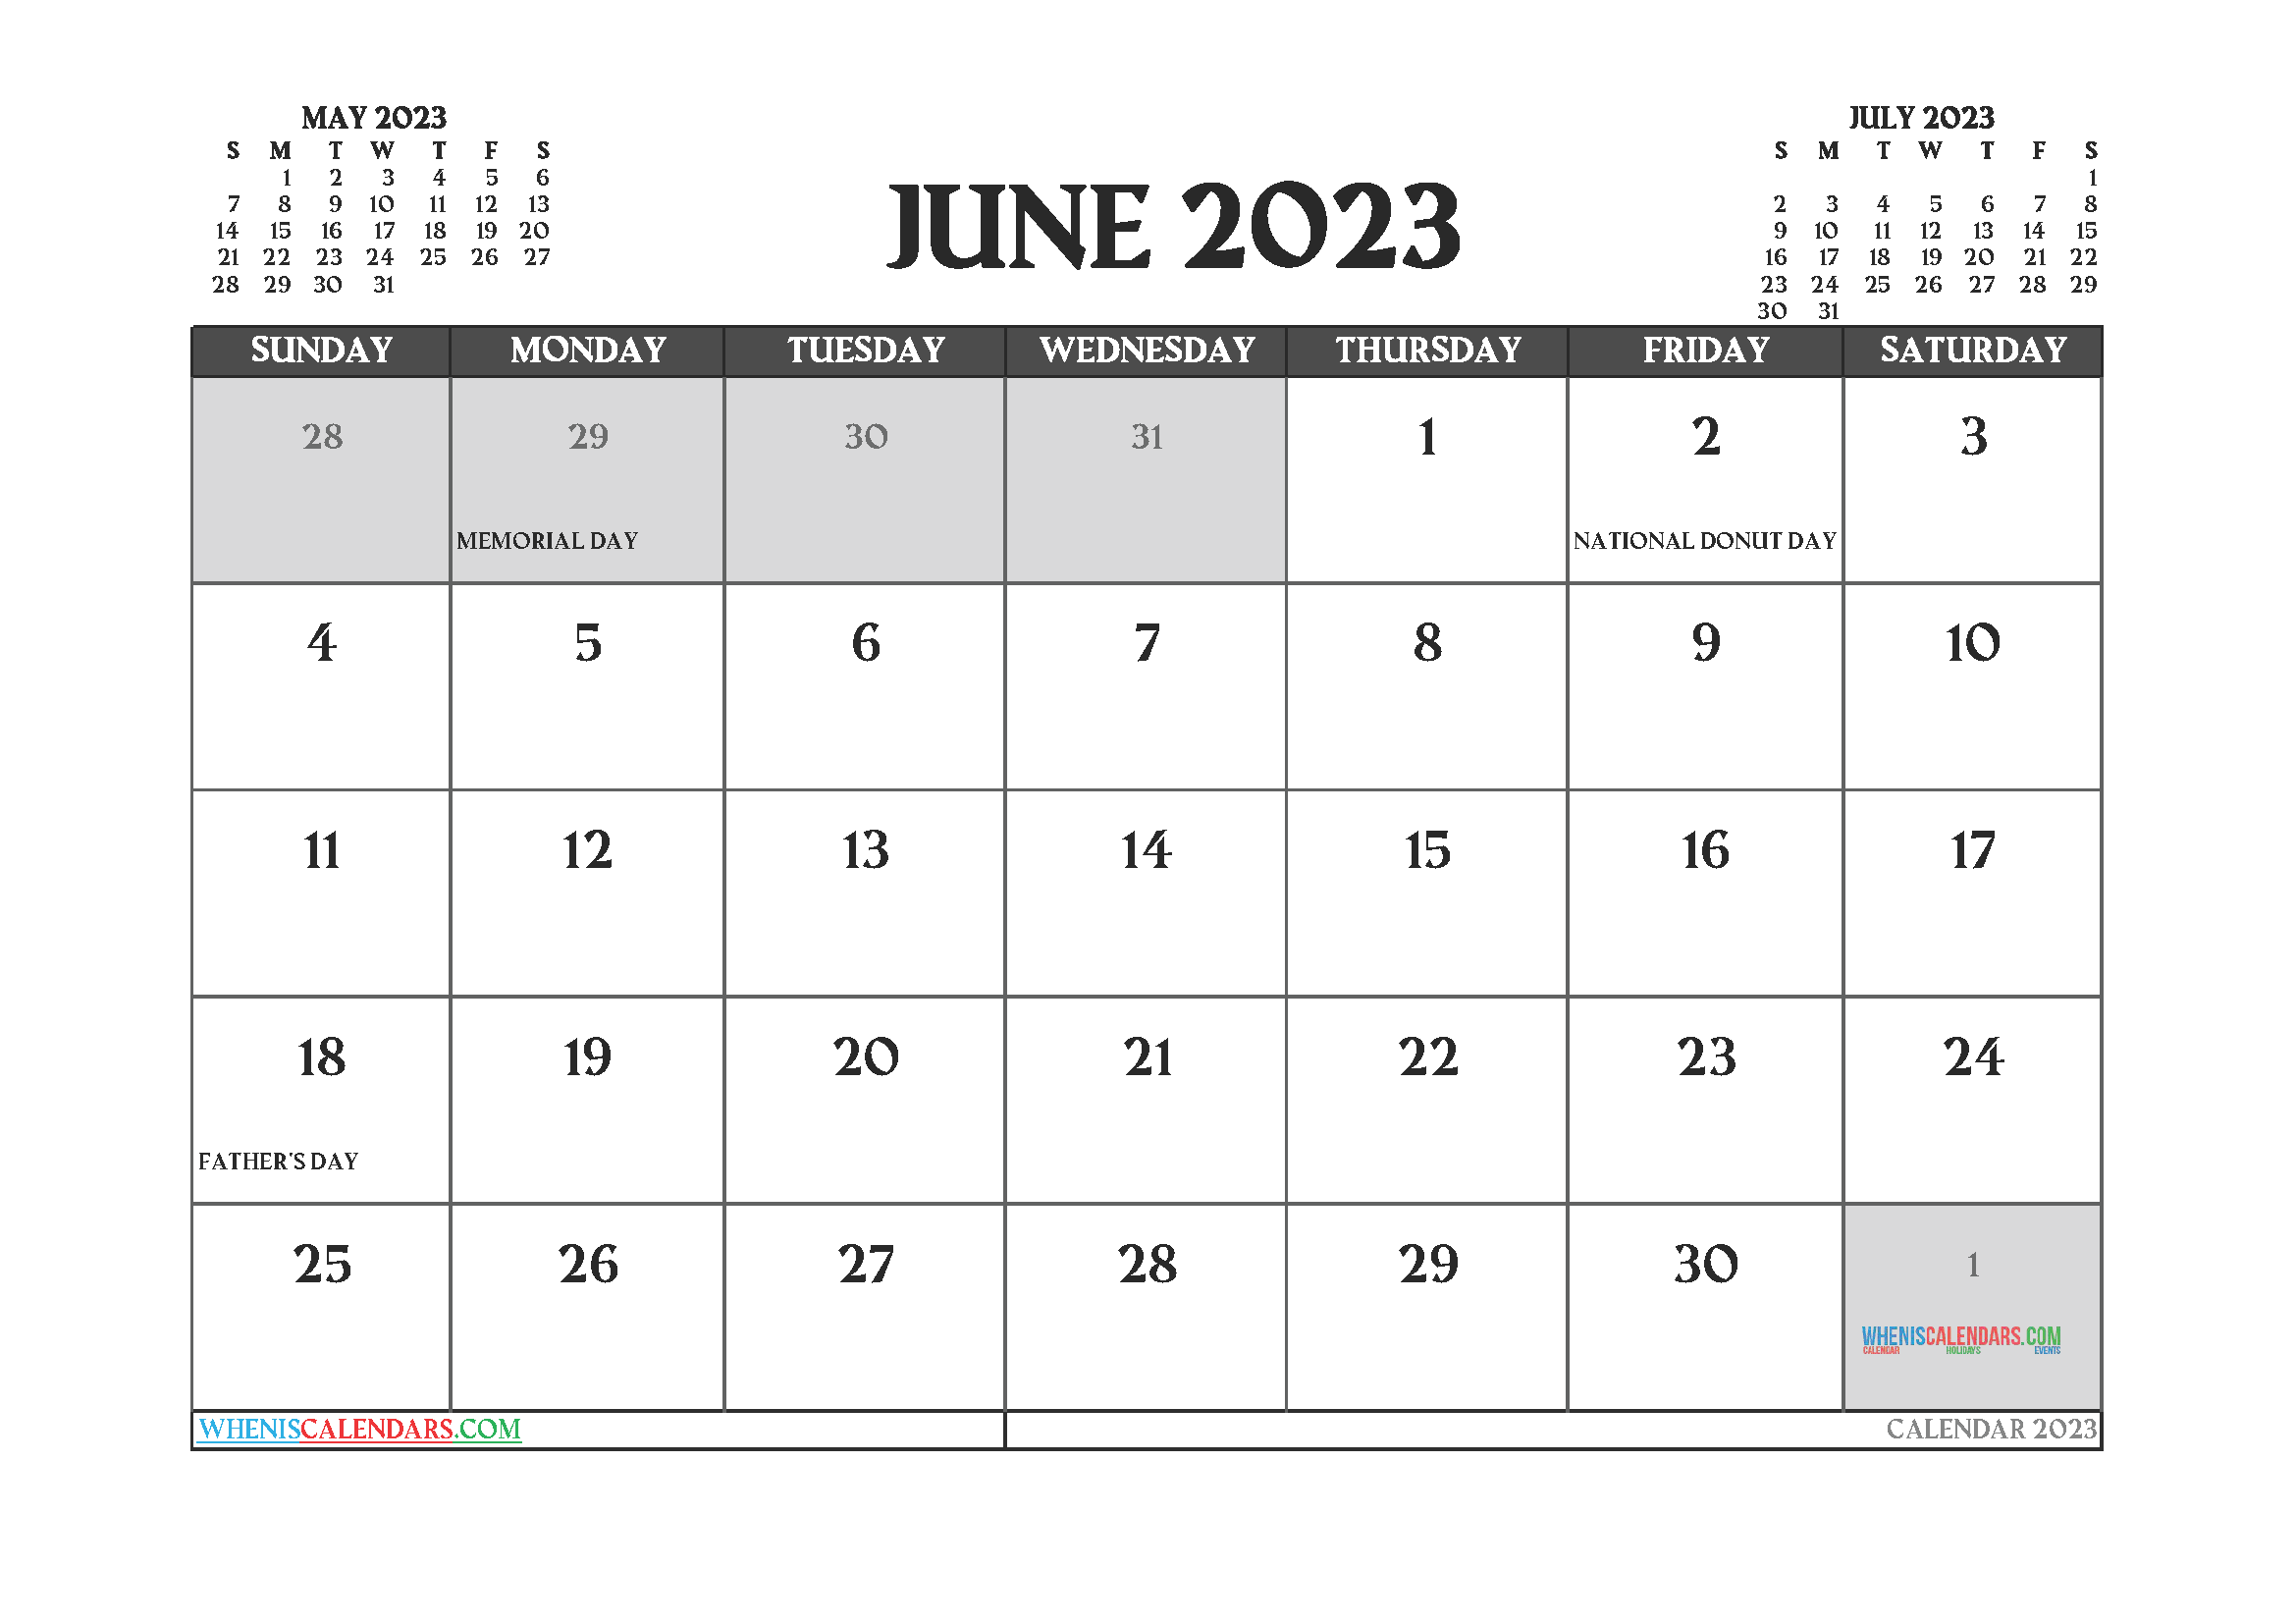 printable-monthly-calendar-2023-june-2023-best-latest-review-of-seaside-calendar-of-events-2023